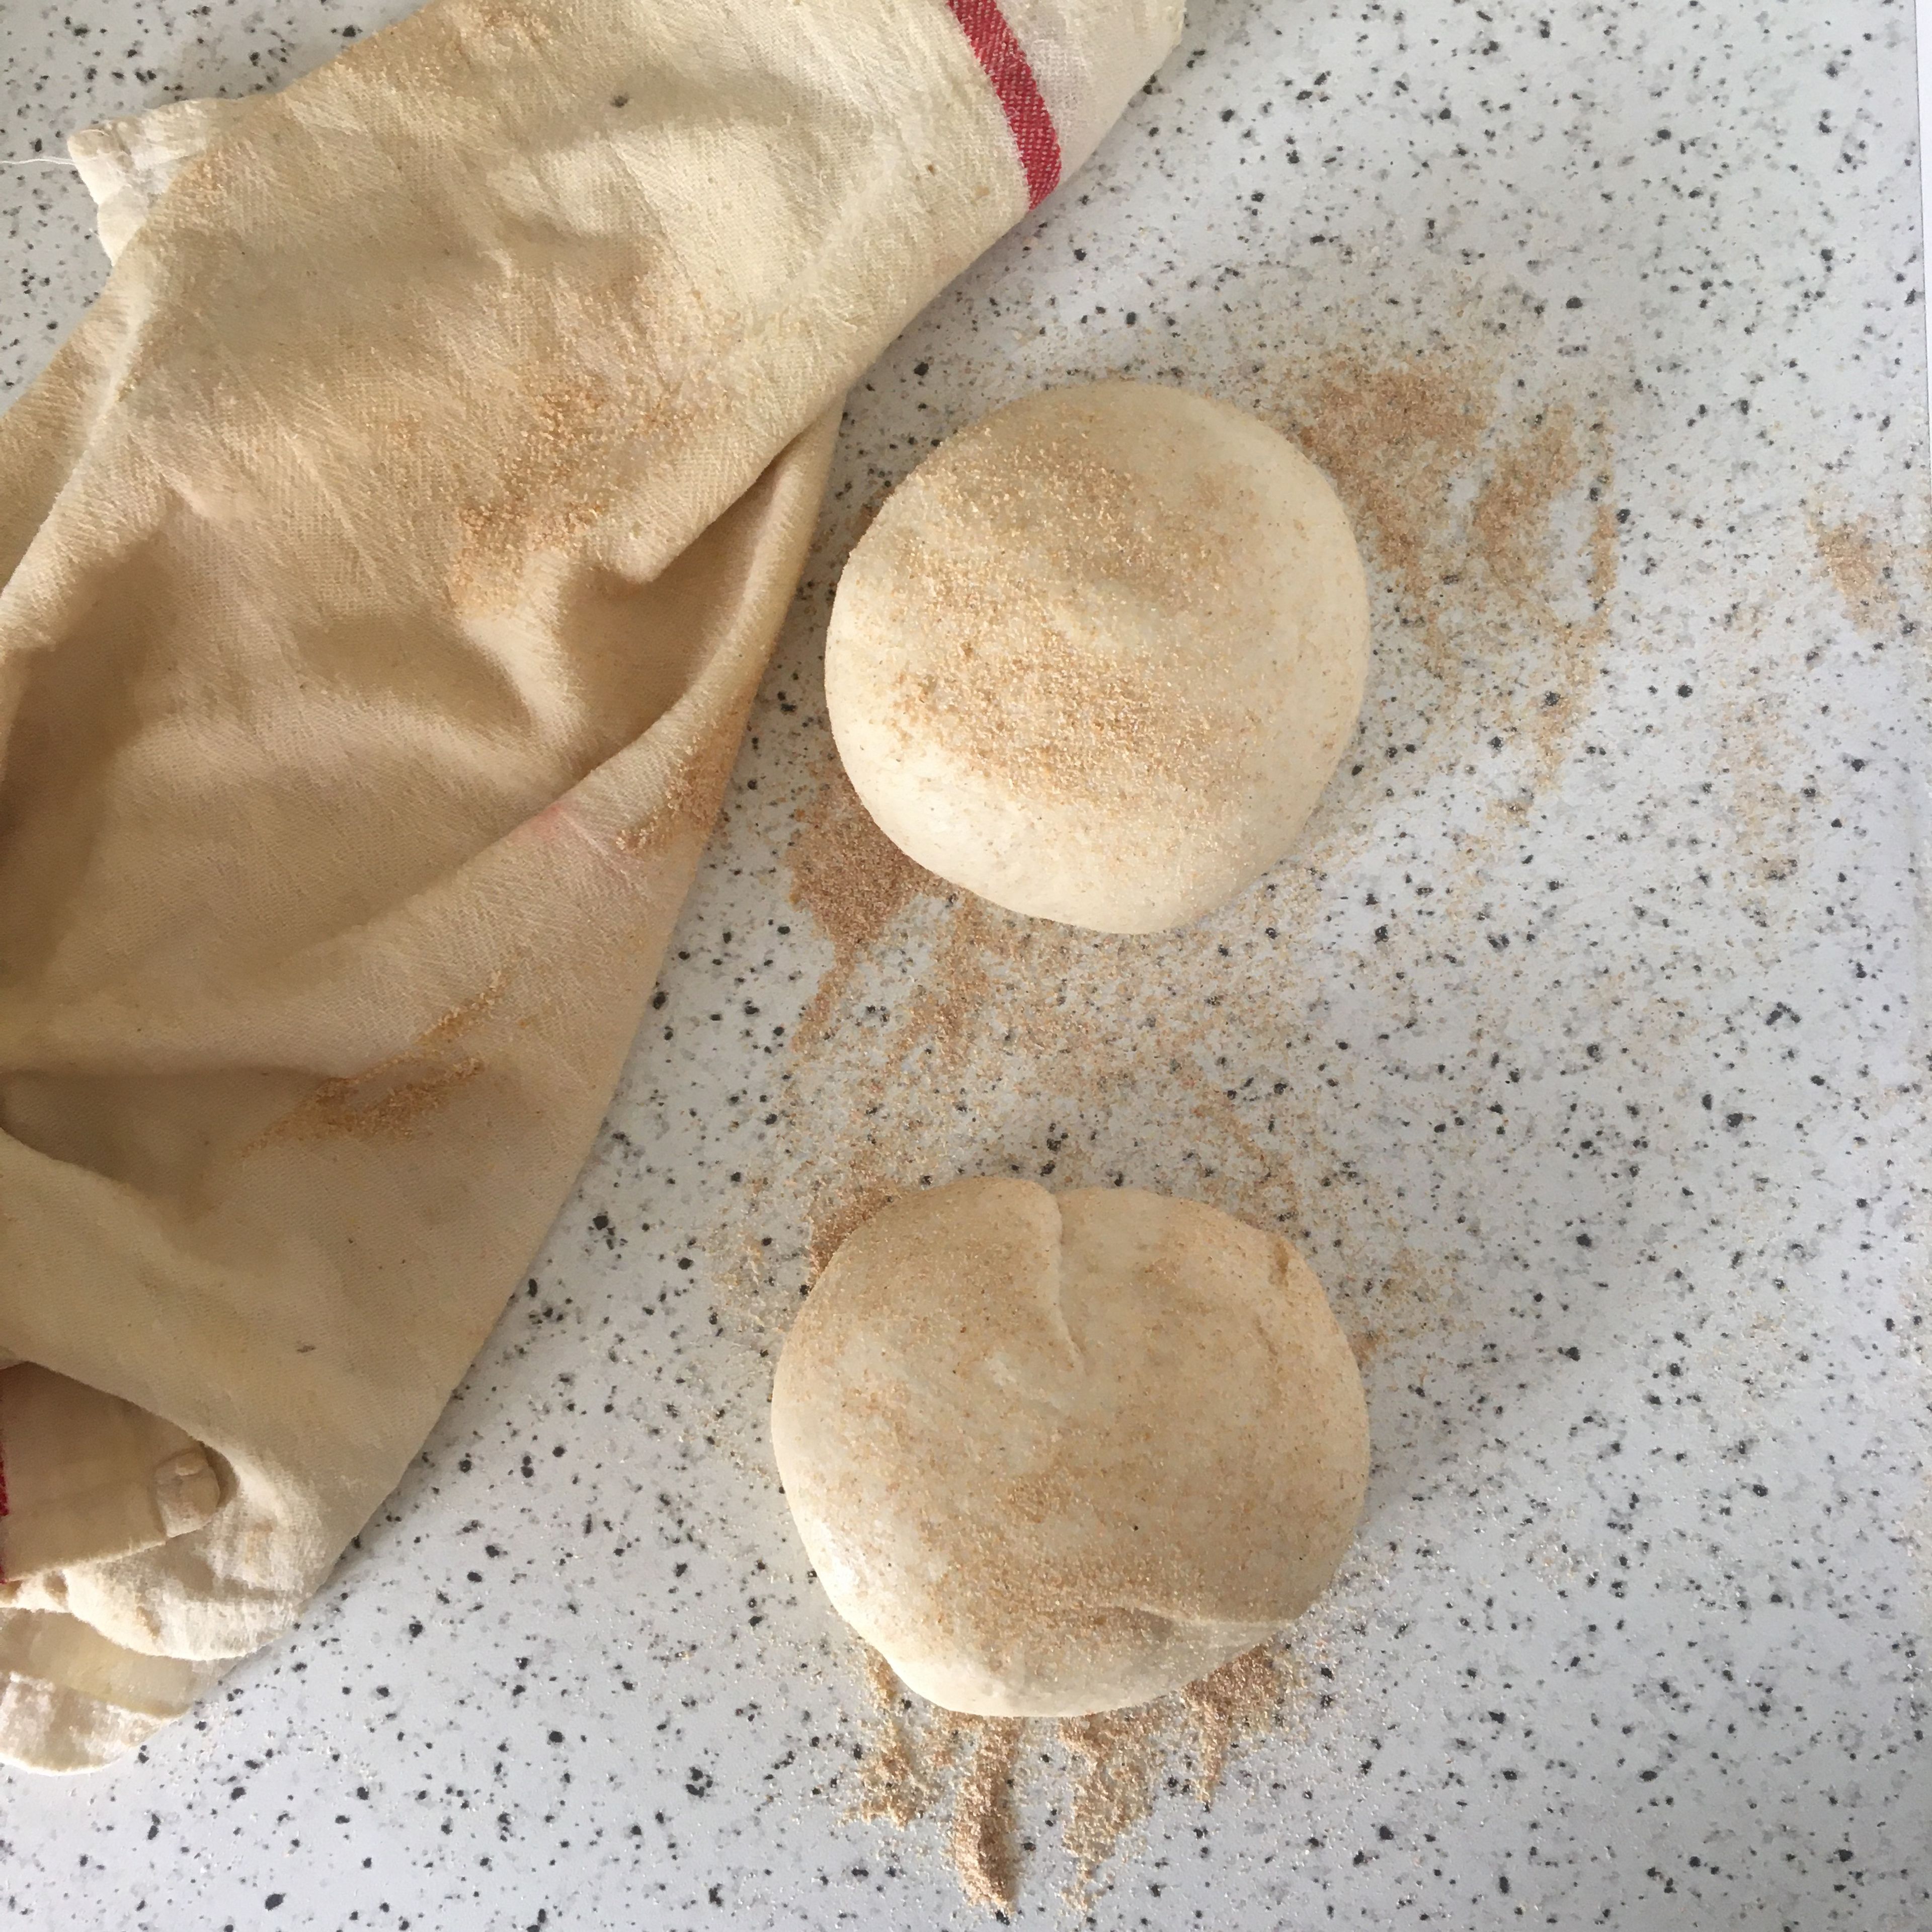 Carefully transfer the risen dough onto a floured work surface and fold for 2-4 times. Divide in two and cover again with the damp towel for second rise, about 30-45 min. Meanwhile, prepare the filling, preheat the oven to 240 C and lightly grease a large baking sheet.